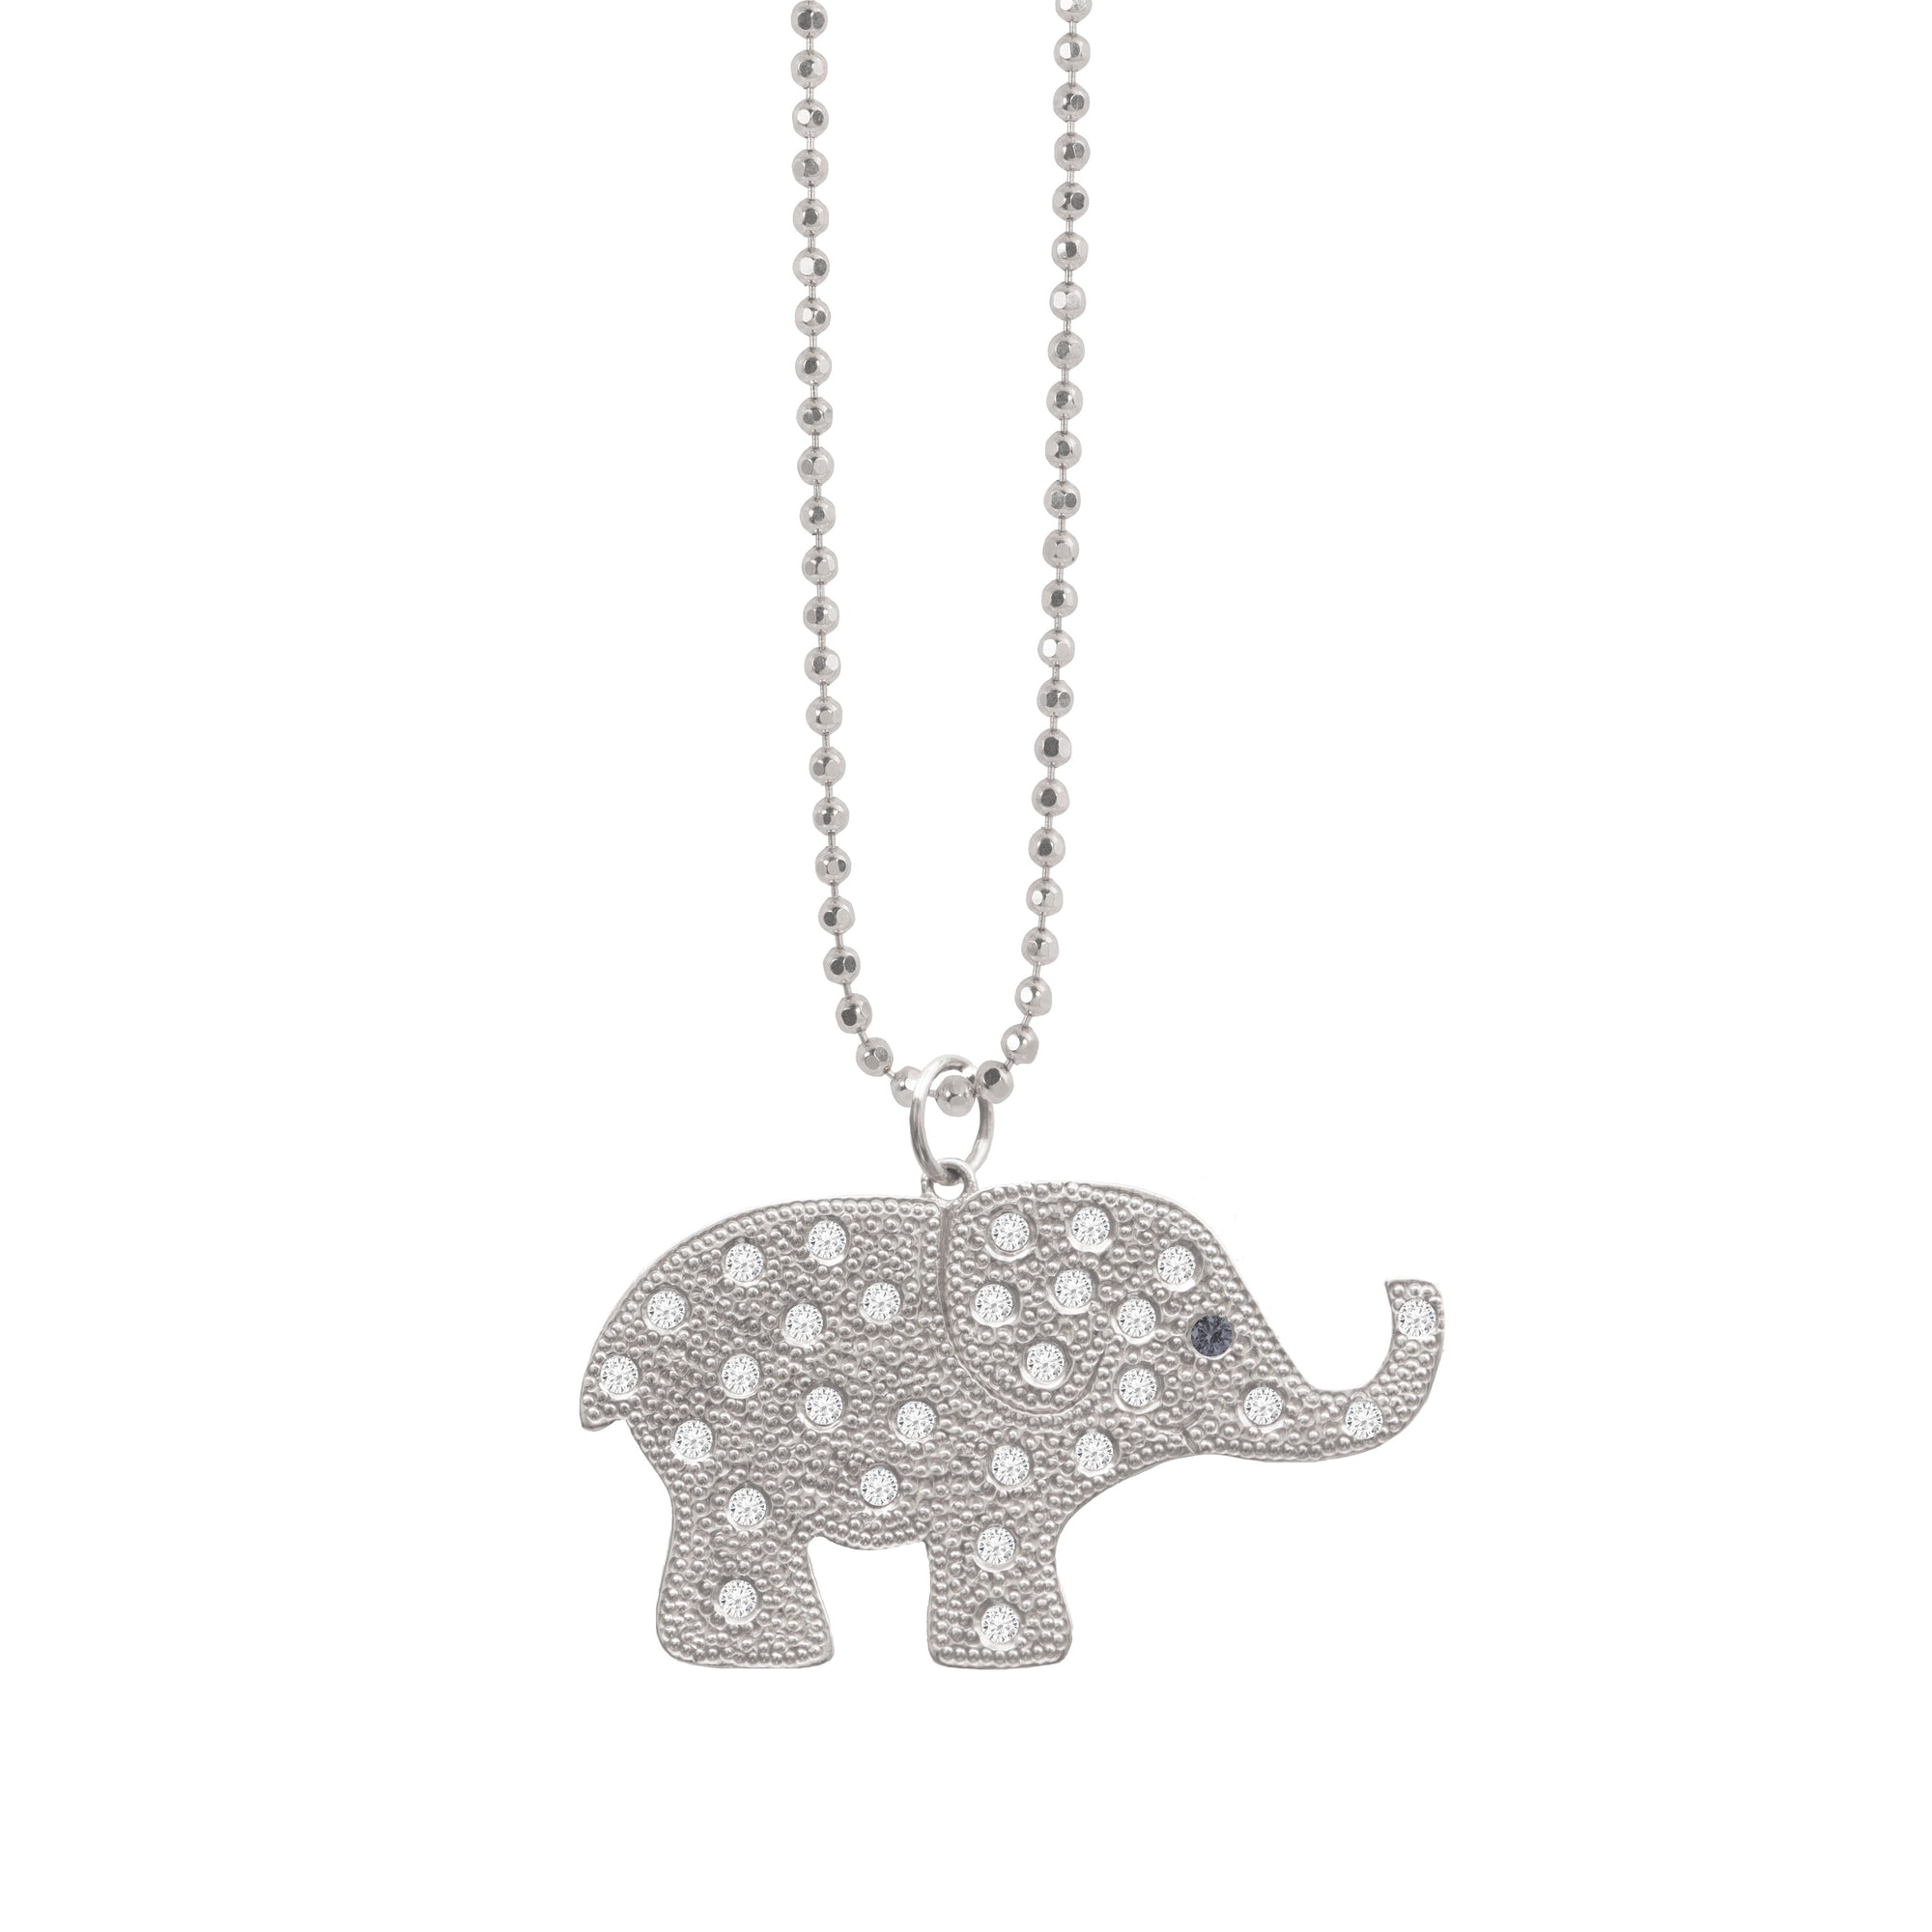 14k yellow gold medium ELLI elephant charm with scattered diamonds and sapphire eye